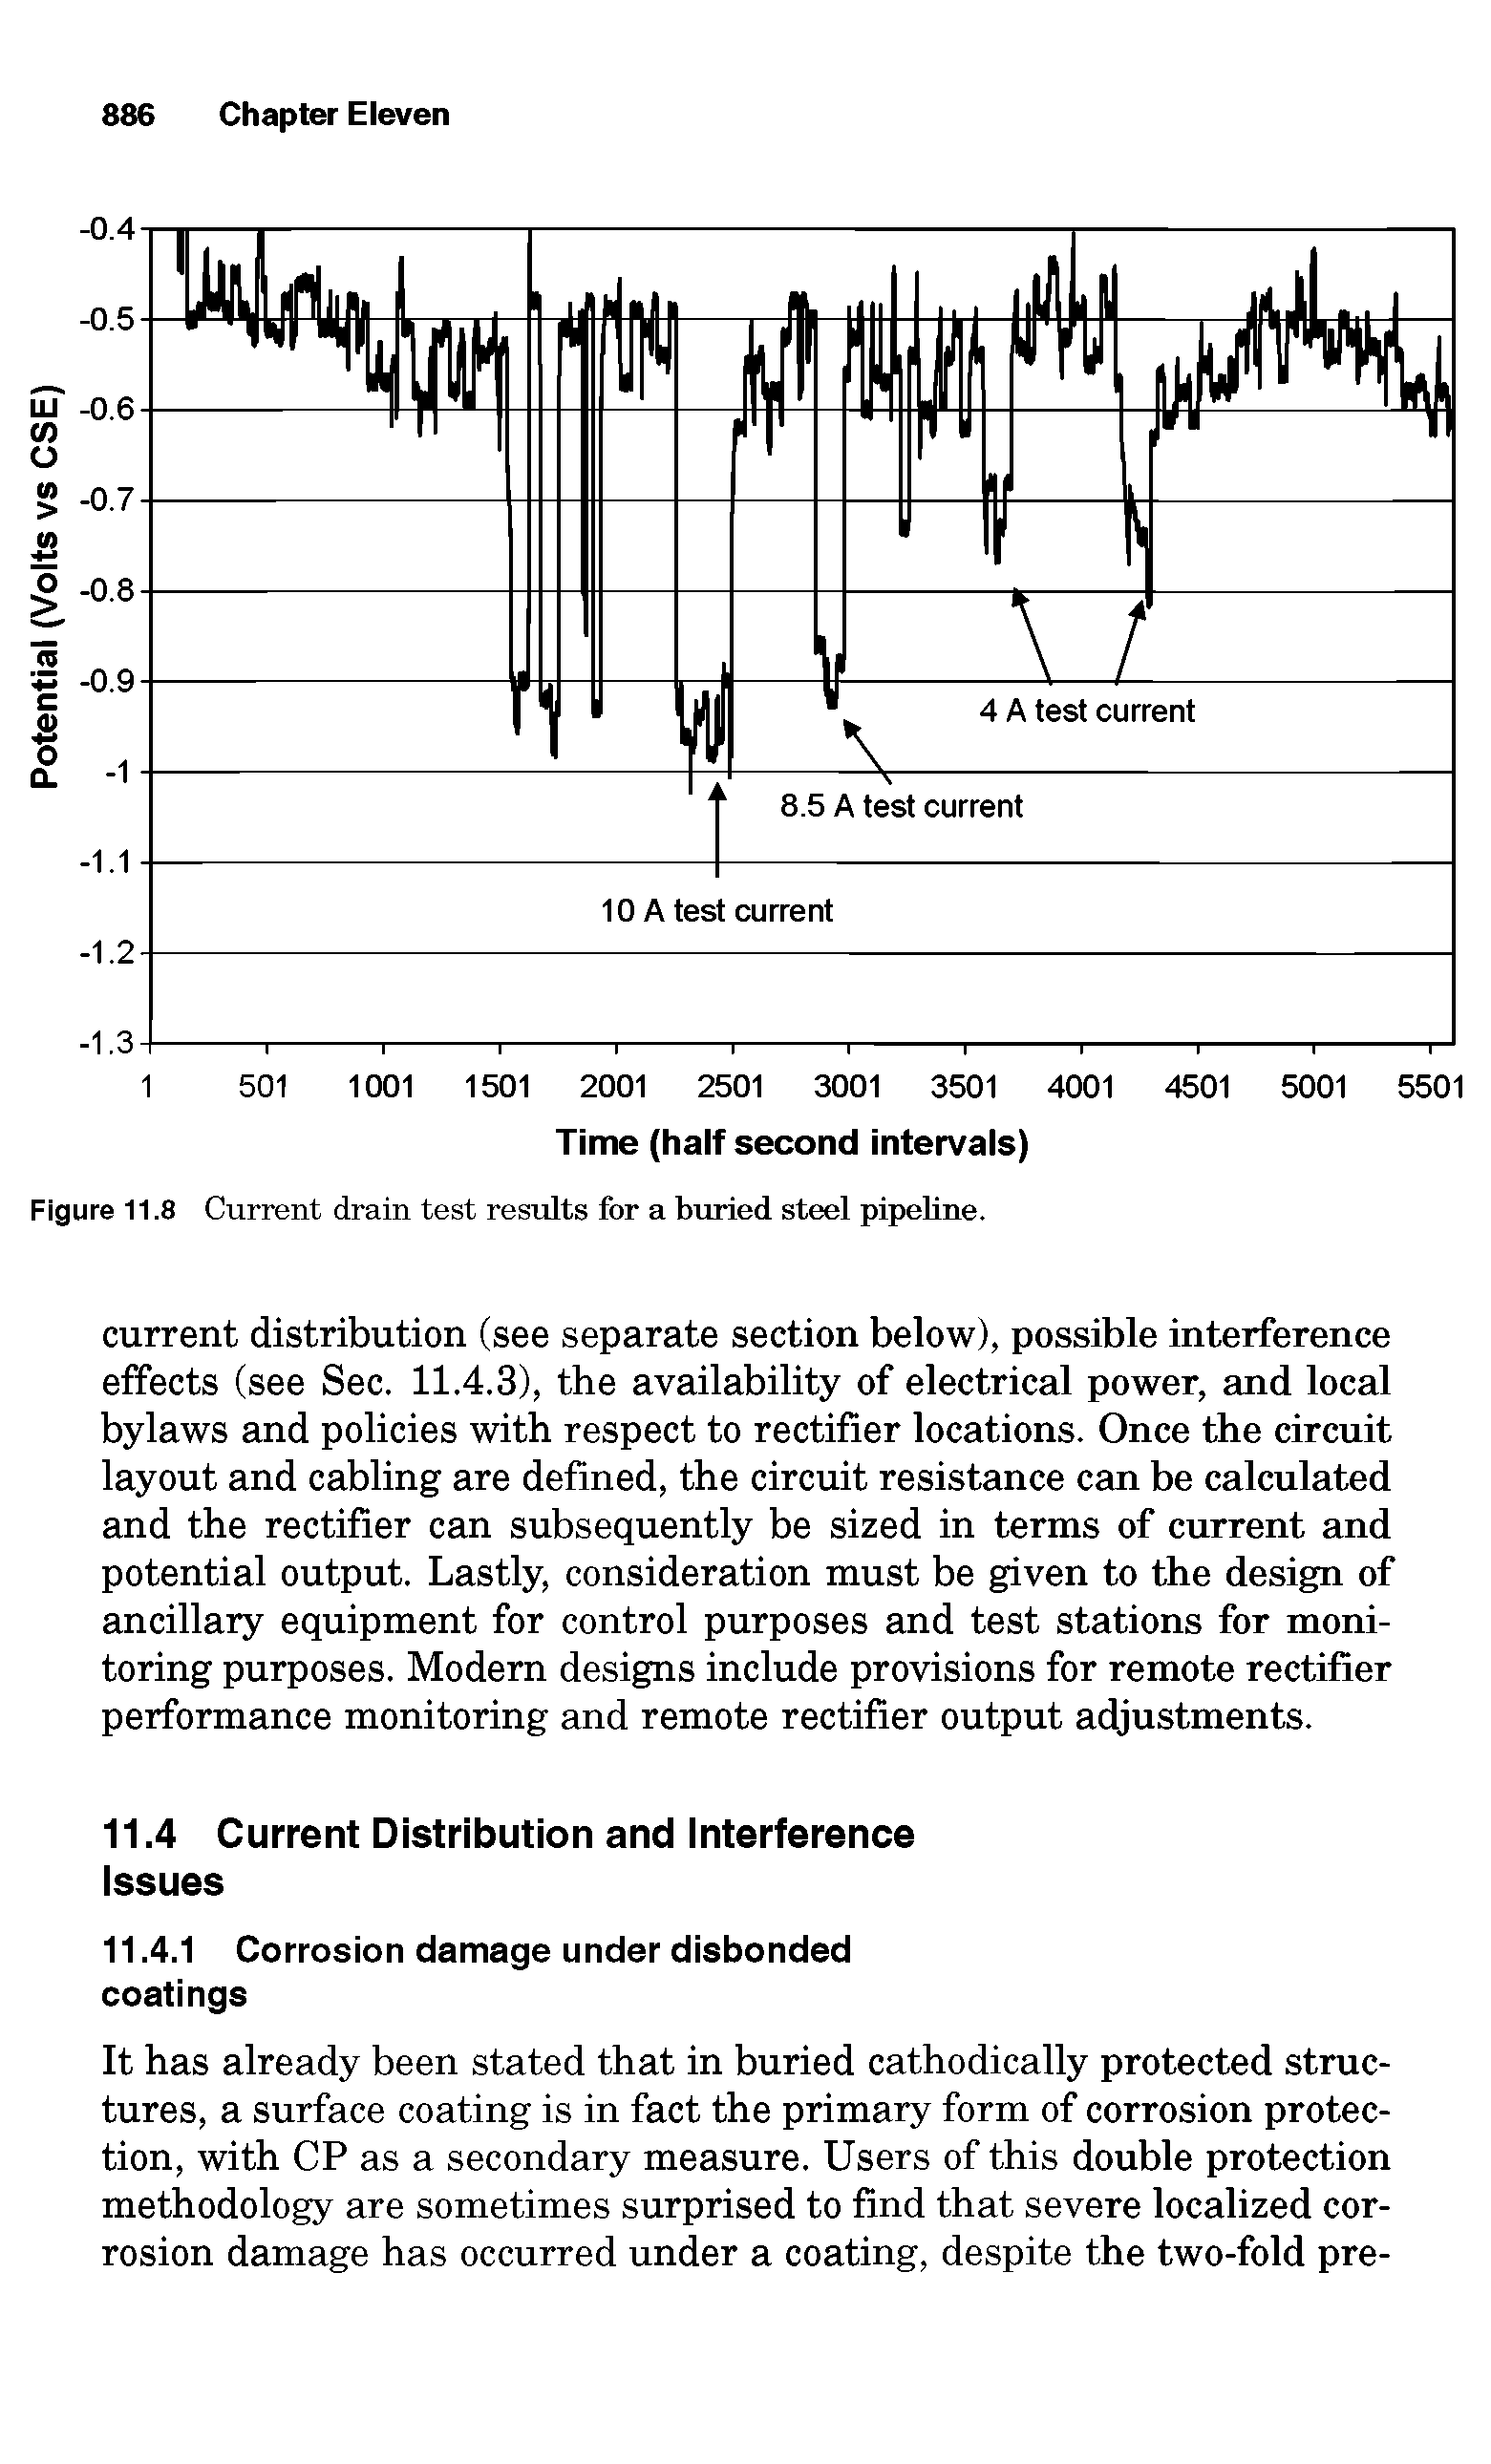 Figure 11.8 Current drain test results for a buried steel pipeline.